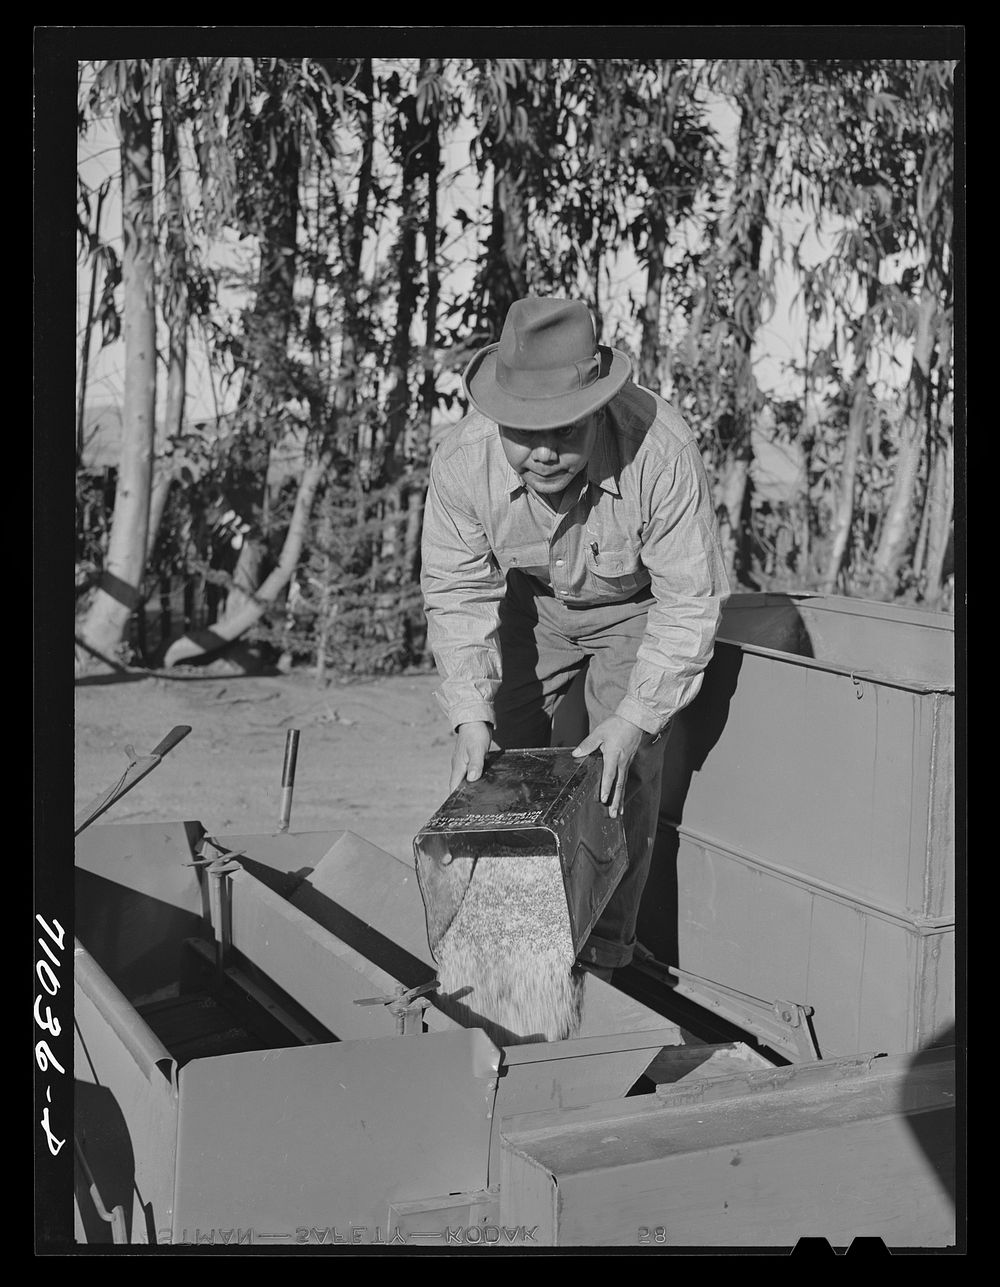 Salinas, California. Putting seed into the planter used in guayule nursery of the Intercontinental Rubber Producers by…